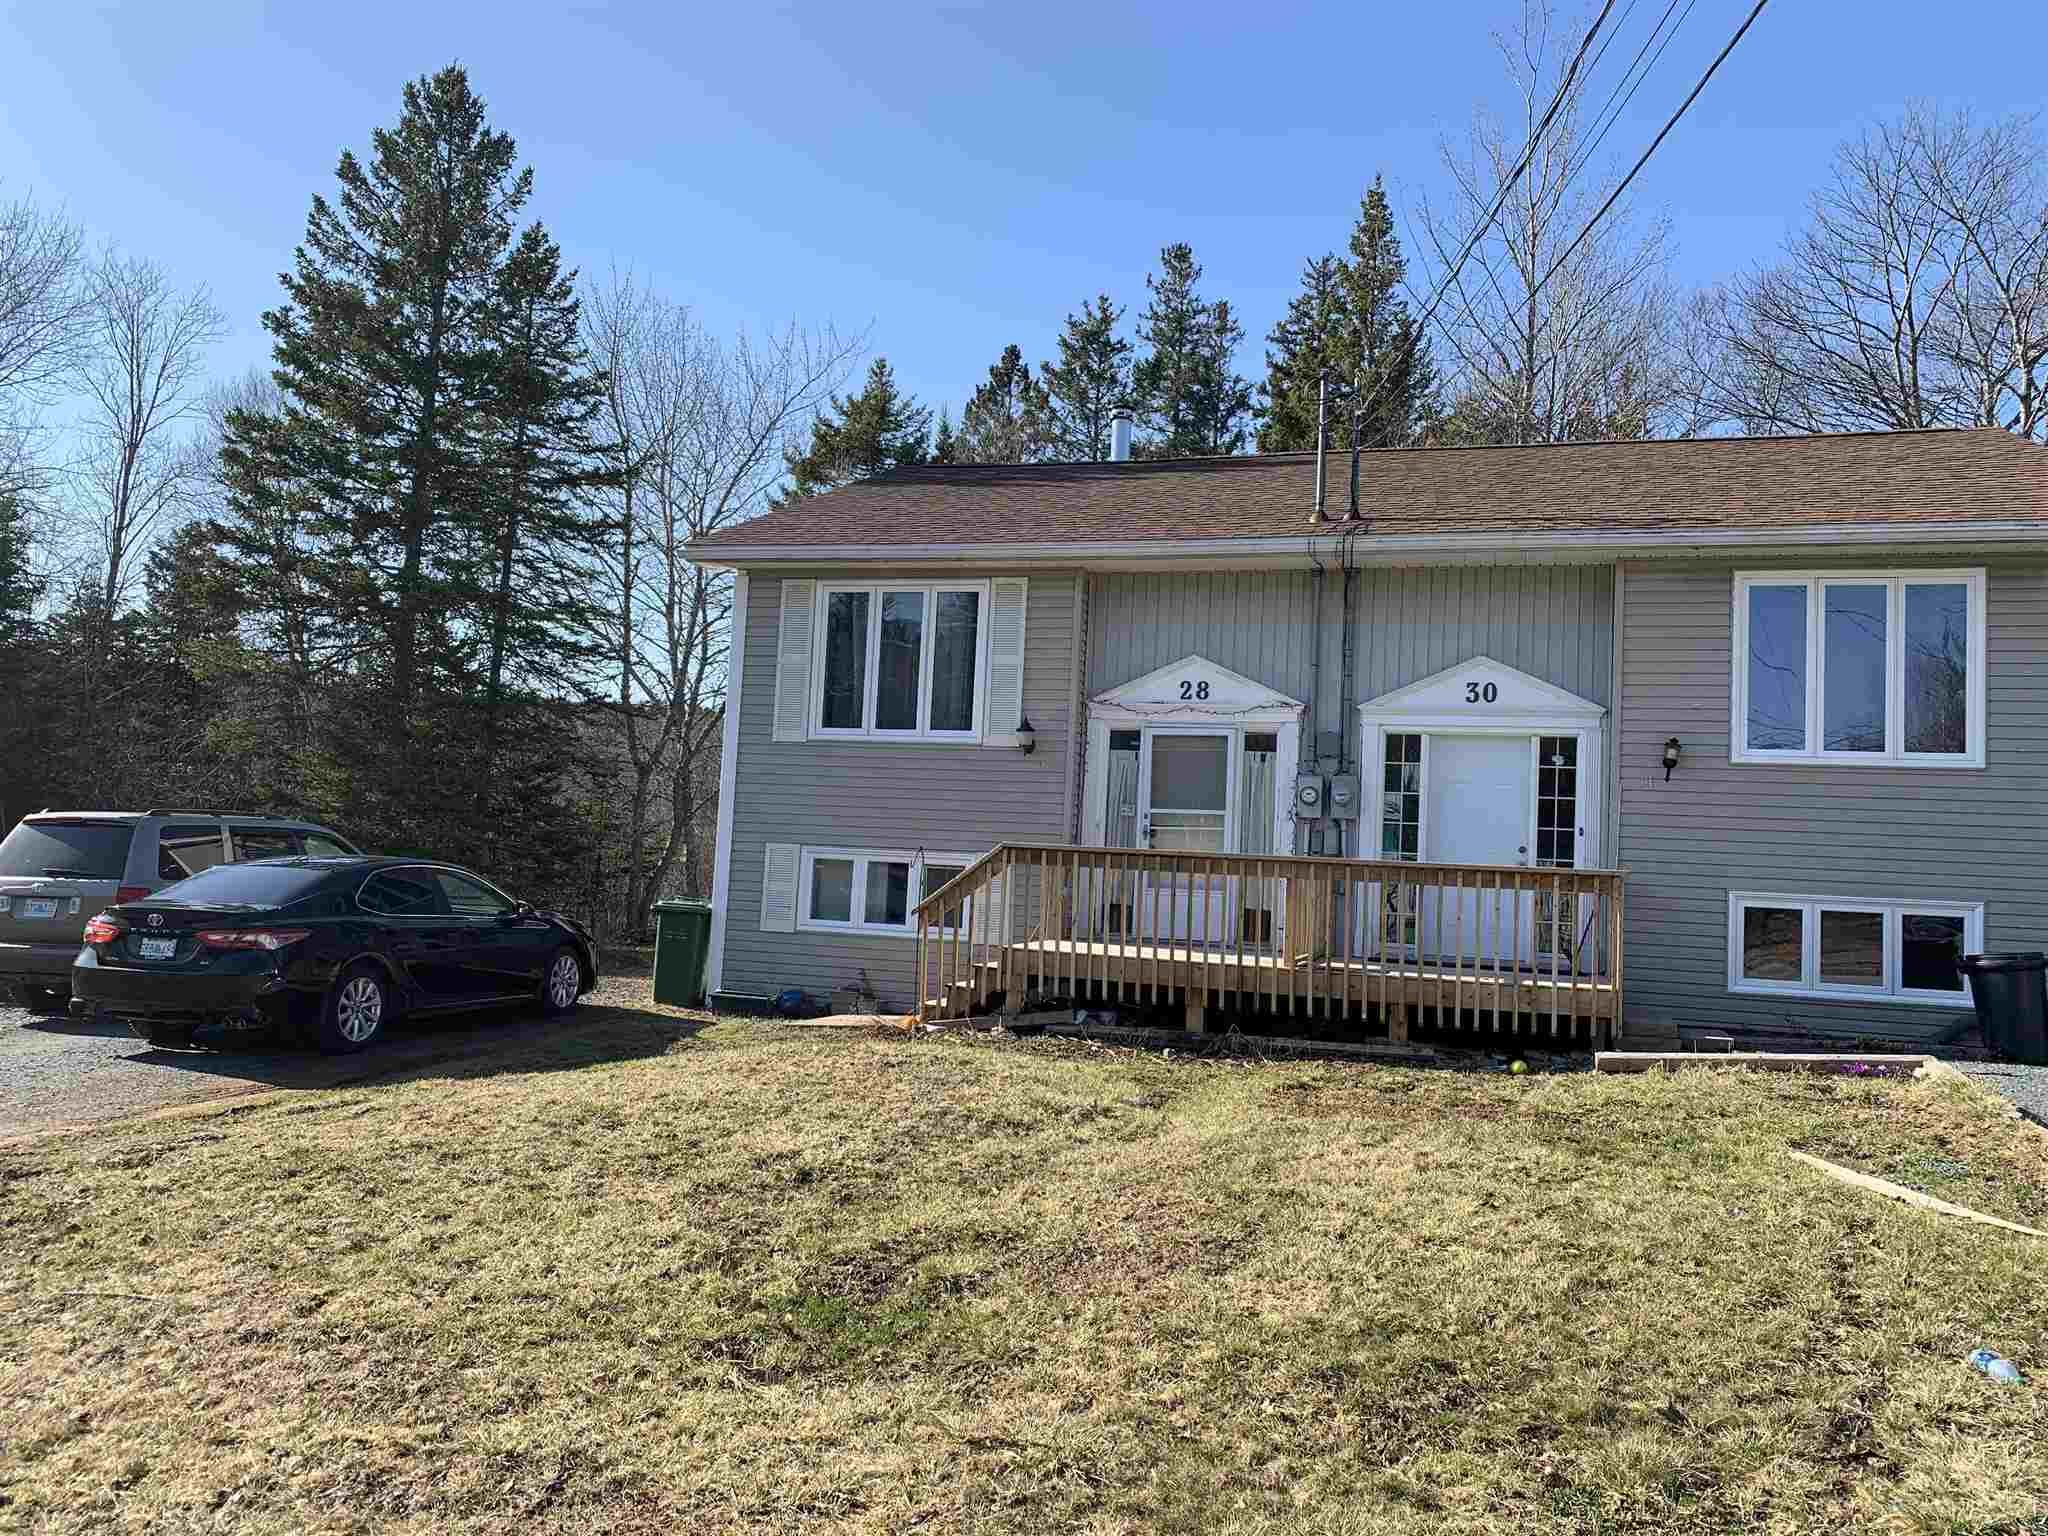 Main Photo: 28 Highrigger Crescent in Middle Sackville: 25-Sackville Residential for sale (Halifax-Dartmouth)  : MLS®# 202106926